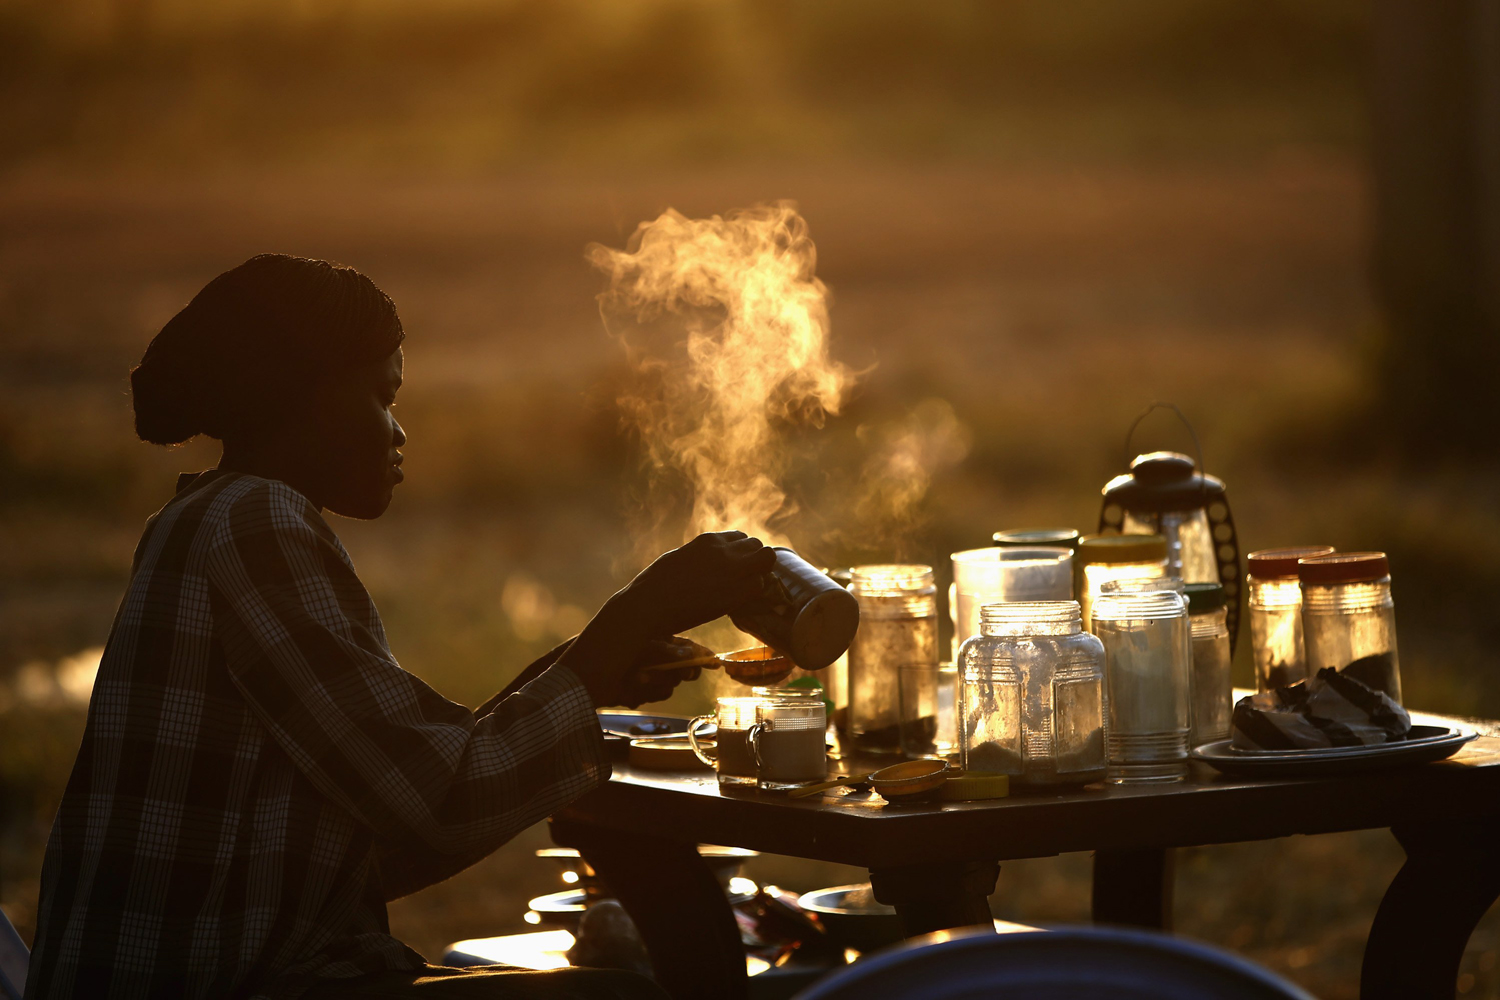 A woman prepares tea at an outdoor coffee shop near a polling station located in a school during a referendum in the town of Abyei